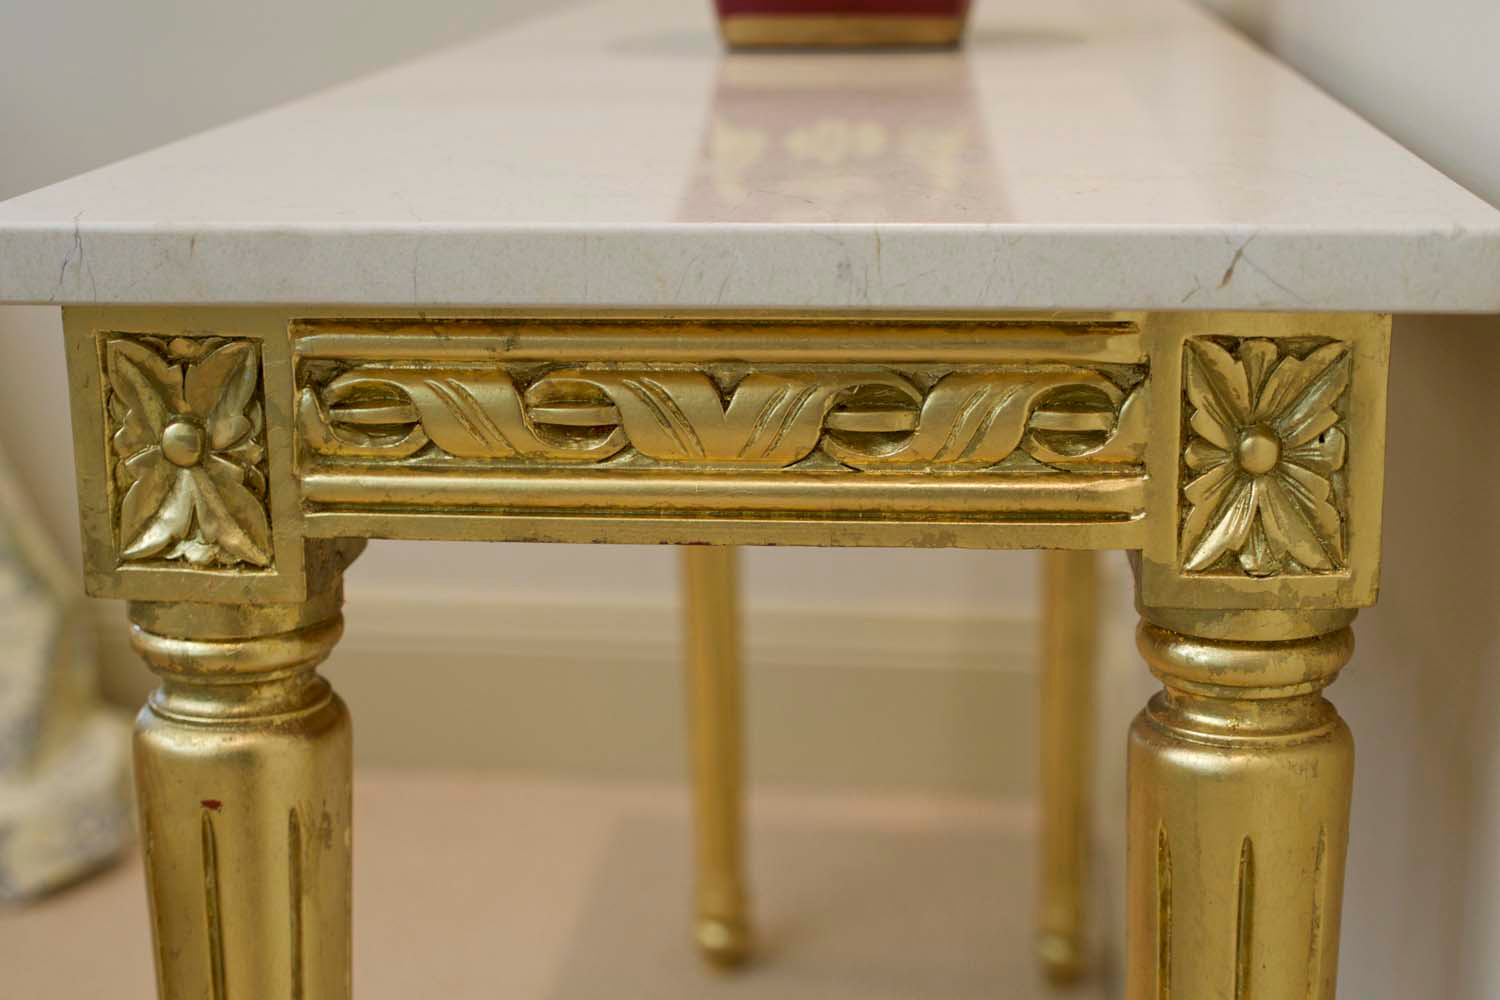 22 French gilded furniture finishes